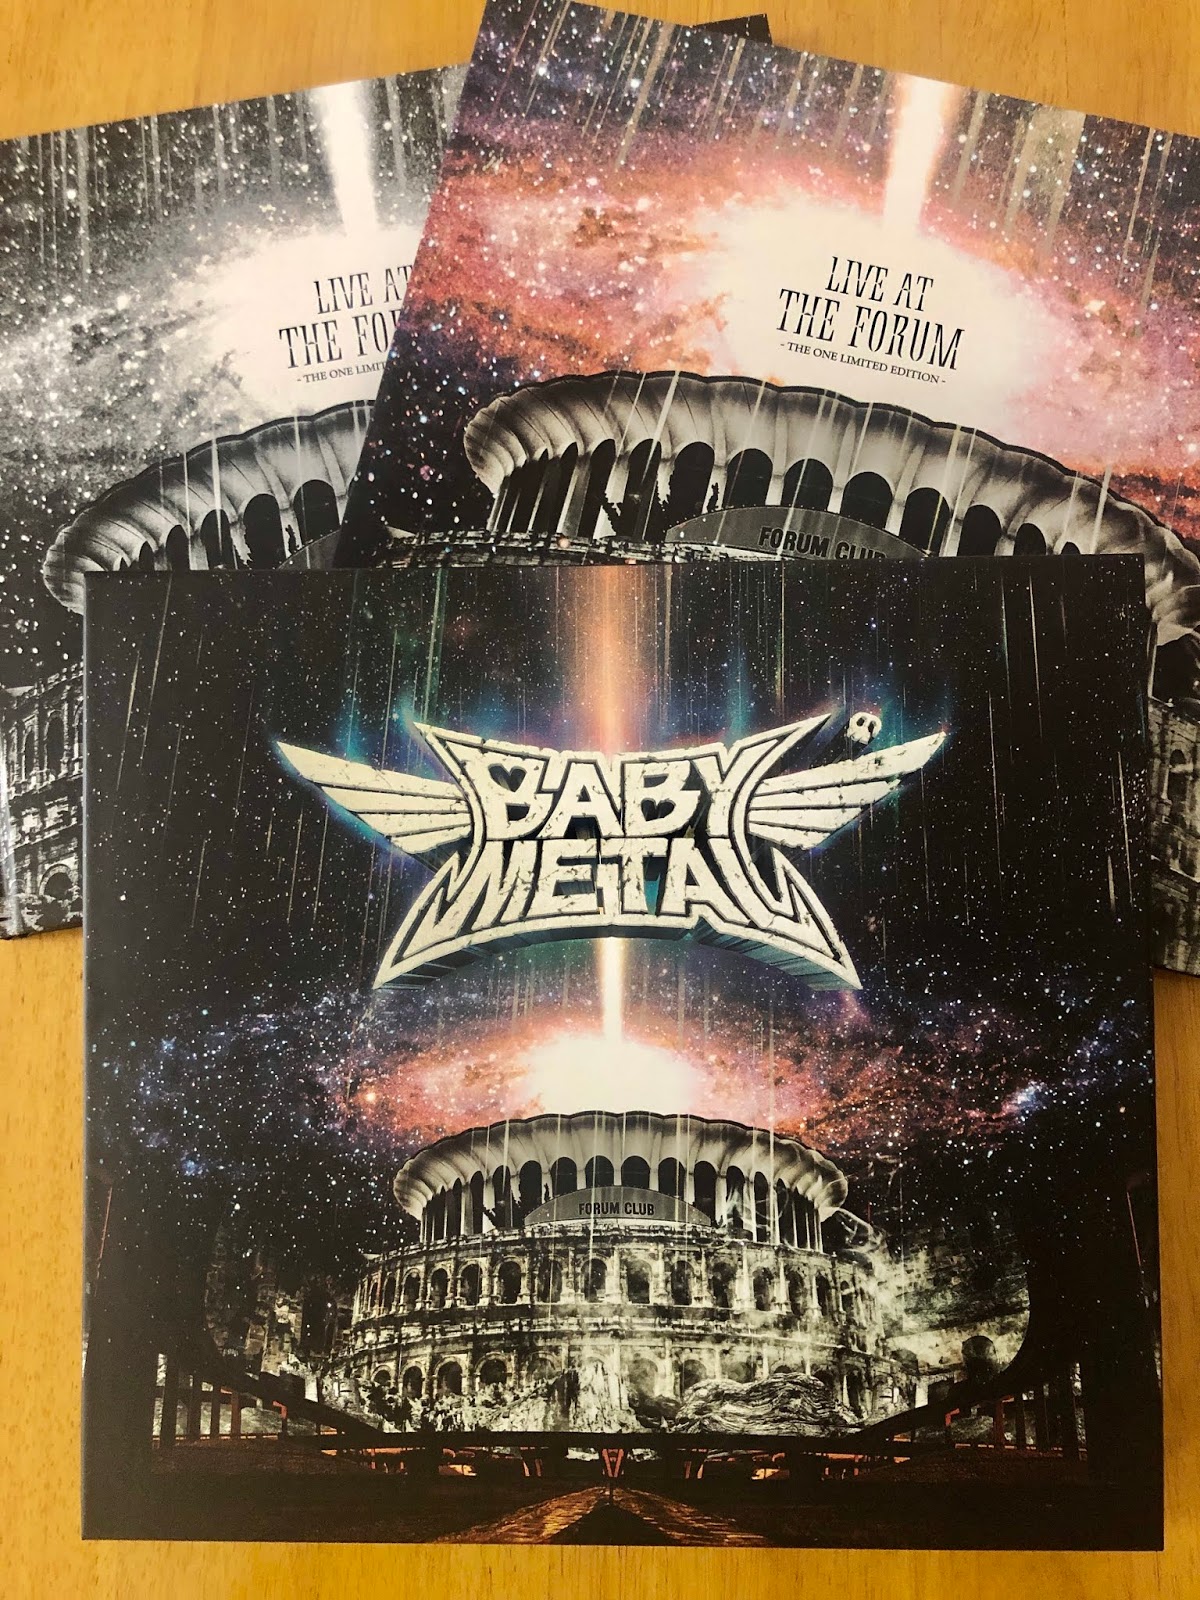 BABYMETAL LIVE AT THE FORUM THE ONE限定盤 - ミュージック